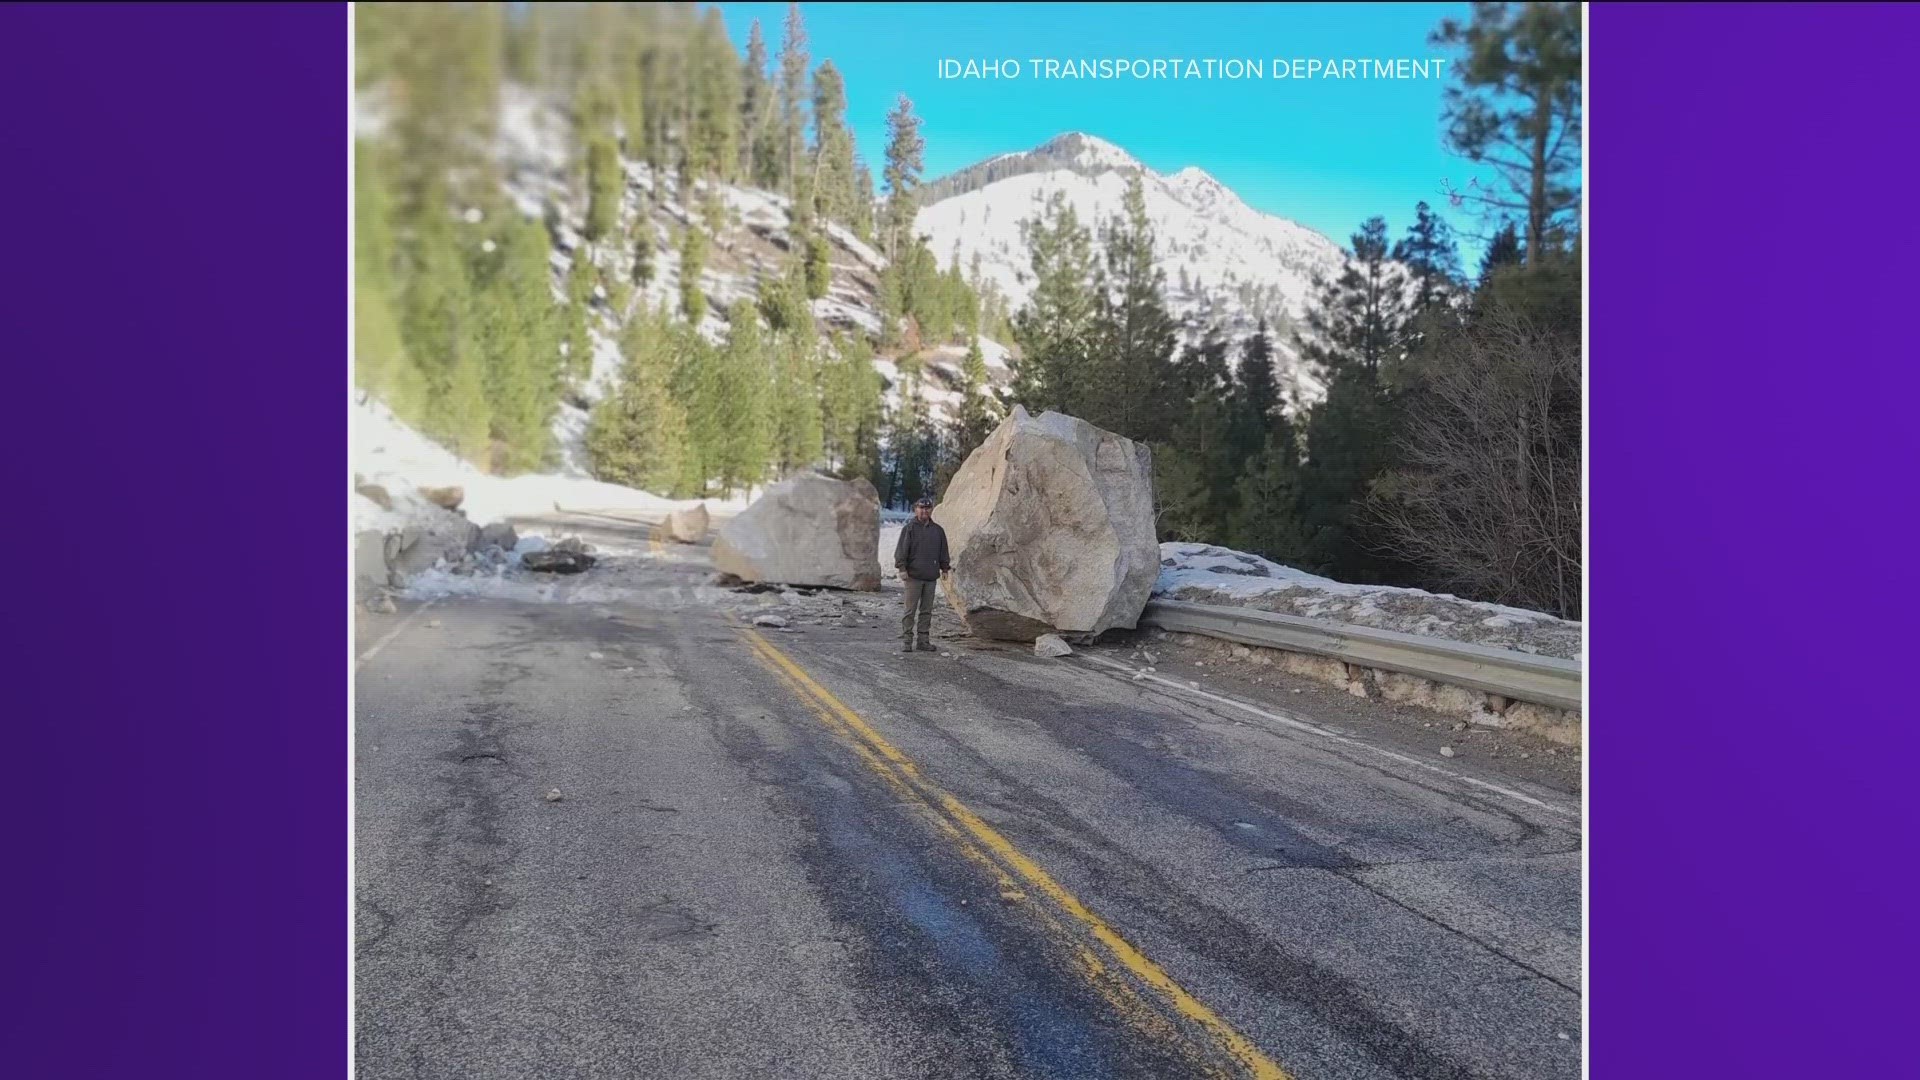 The highway has since reopened. ITD officials wanted to remind the public to always be prepared for the unexpected in rural Idaho.